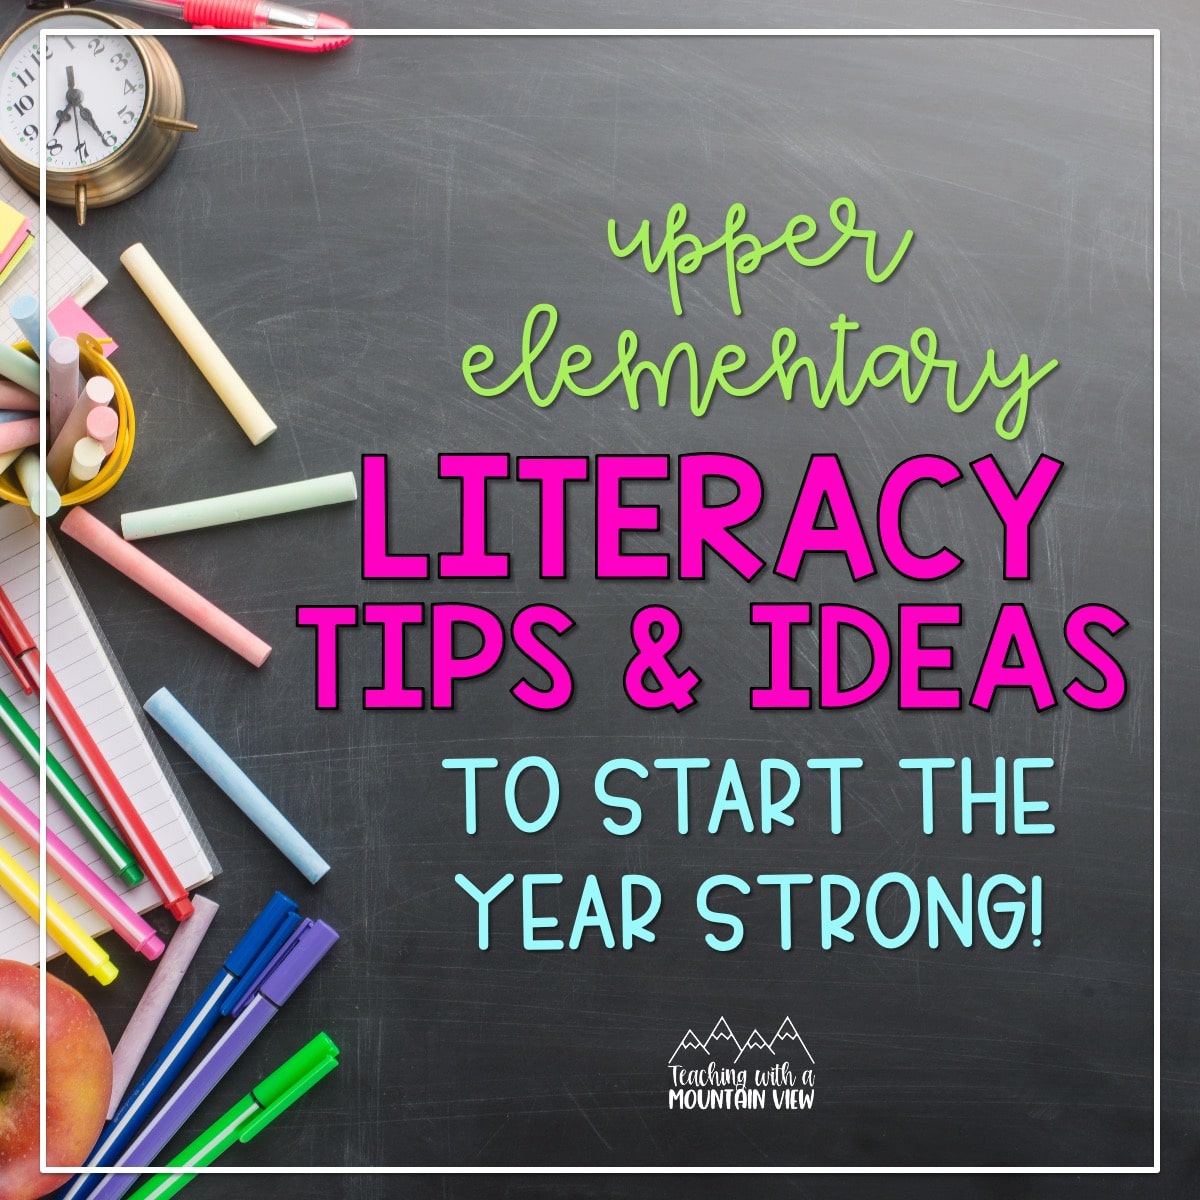 Literacy tips and activities to start the year strong in upper elementary. Includes ideas for morning work, centers, and review.